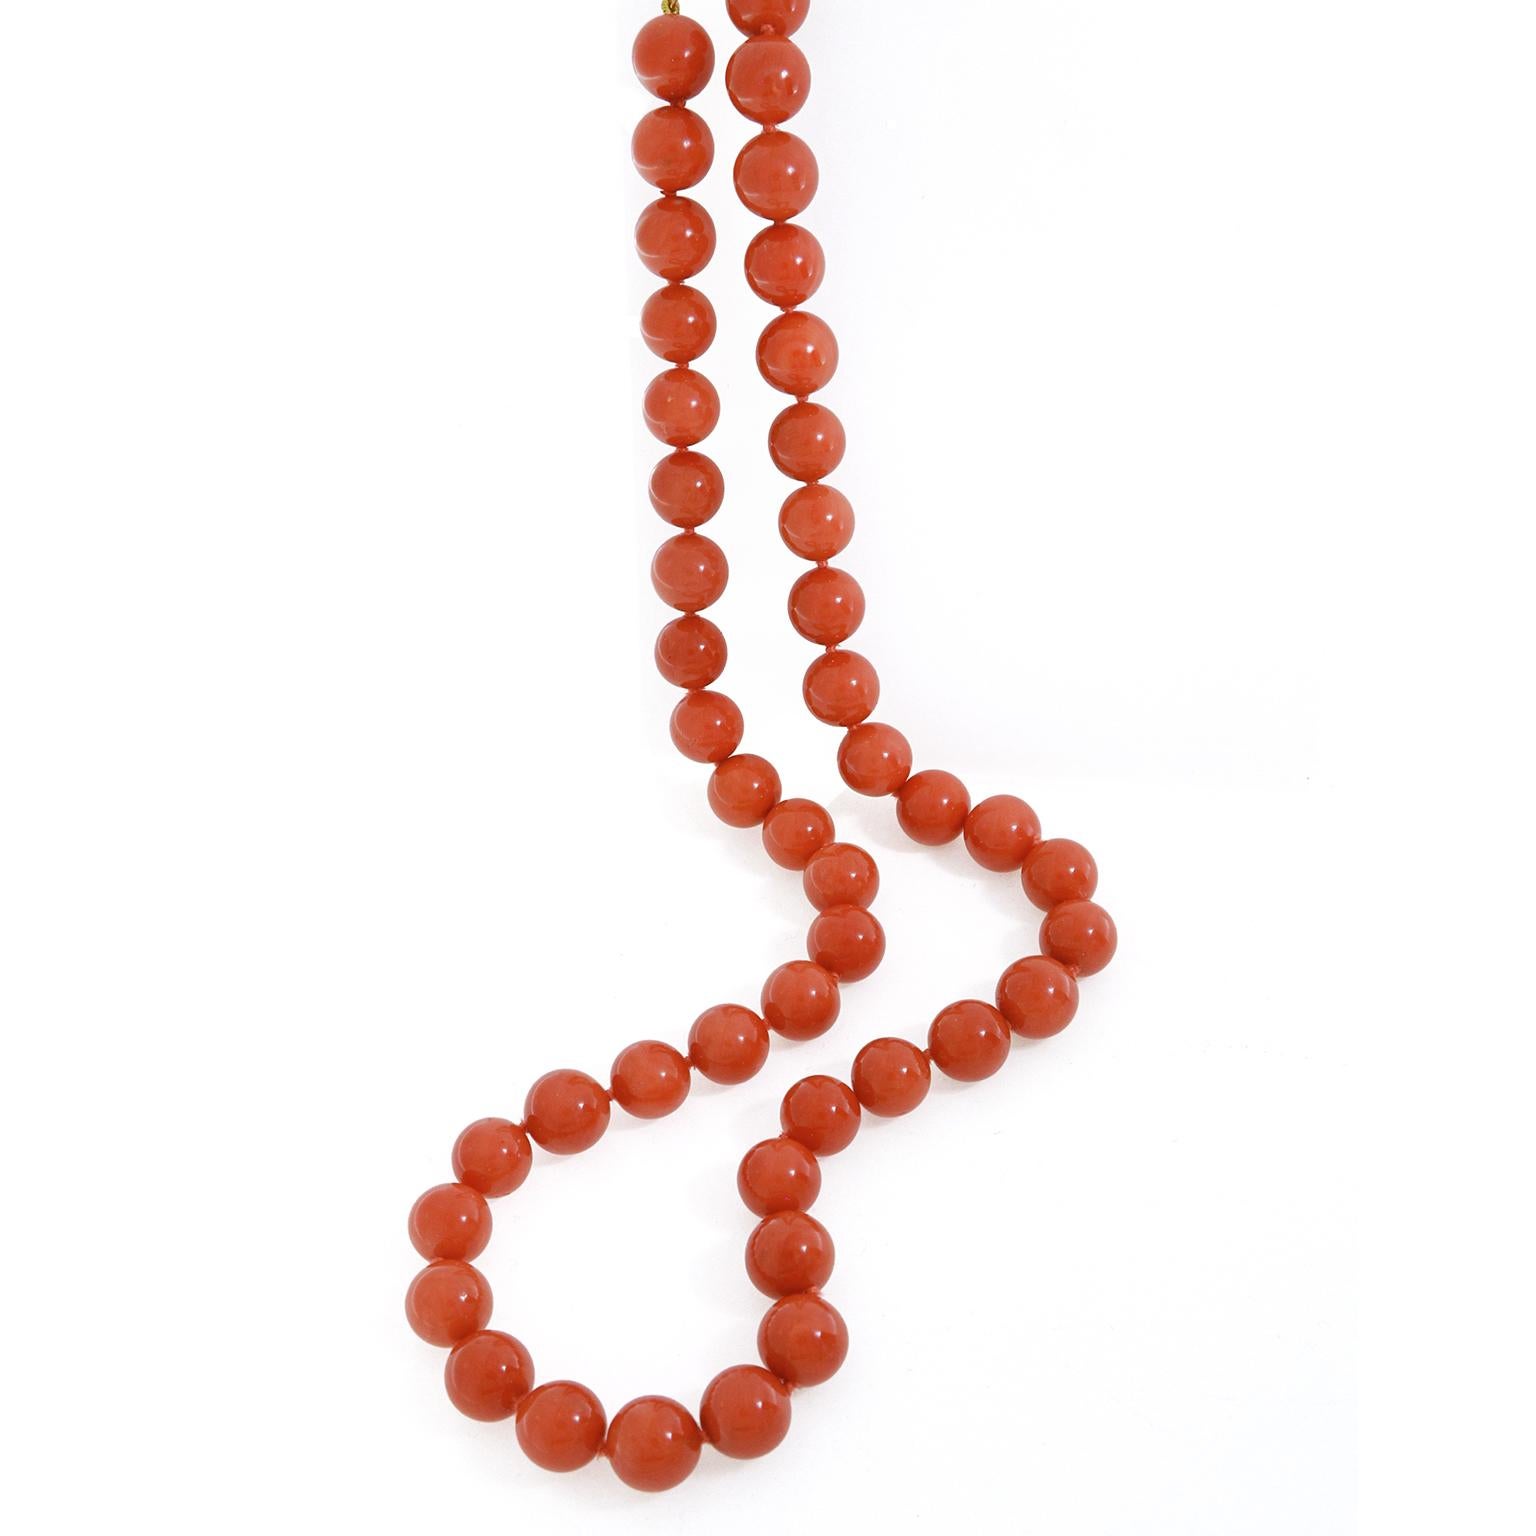 Fiery orange red coral is the essence of this beaded necklace. Orbs of the gem are strung on a thread of a coordinating shade in a graduated arrangement. At the ends of the necklace, the coral is 11.4 mm. This widens to 12mm in the center. The total